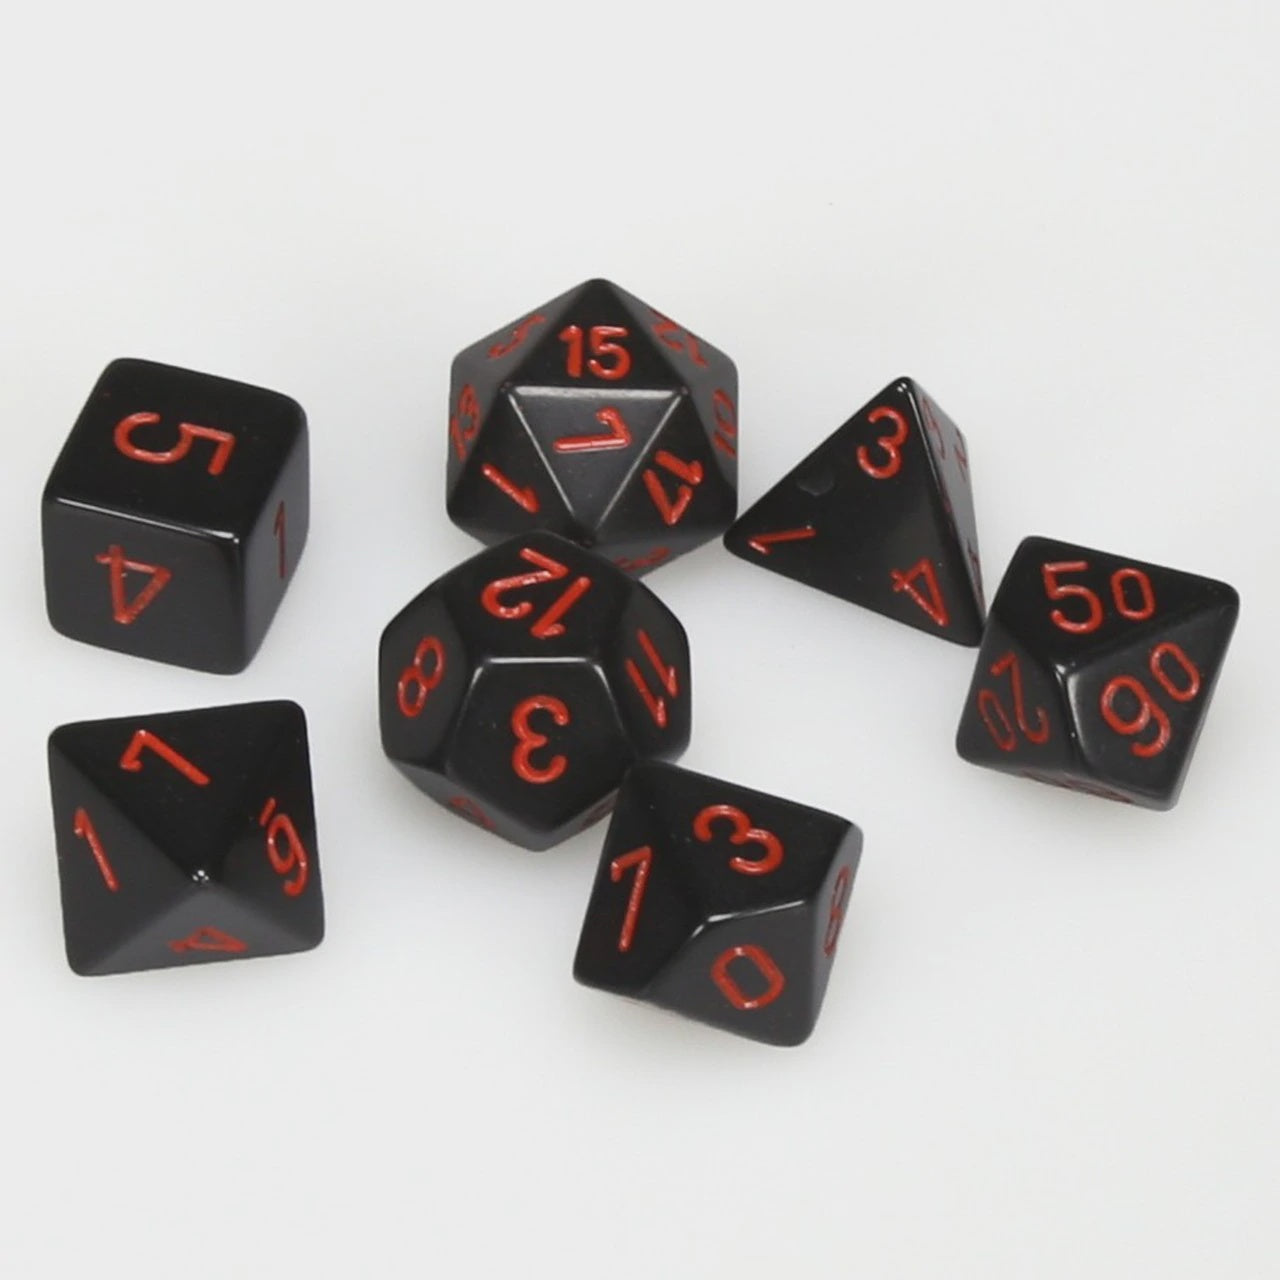 CHESSEX 7 DIE POLYHEDRAL DICE SET: OPAQUE BLACK/RED